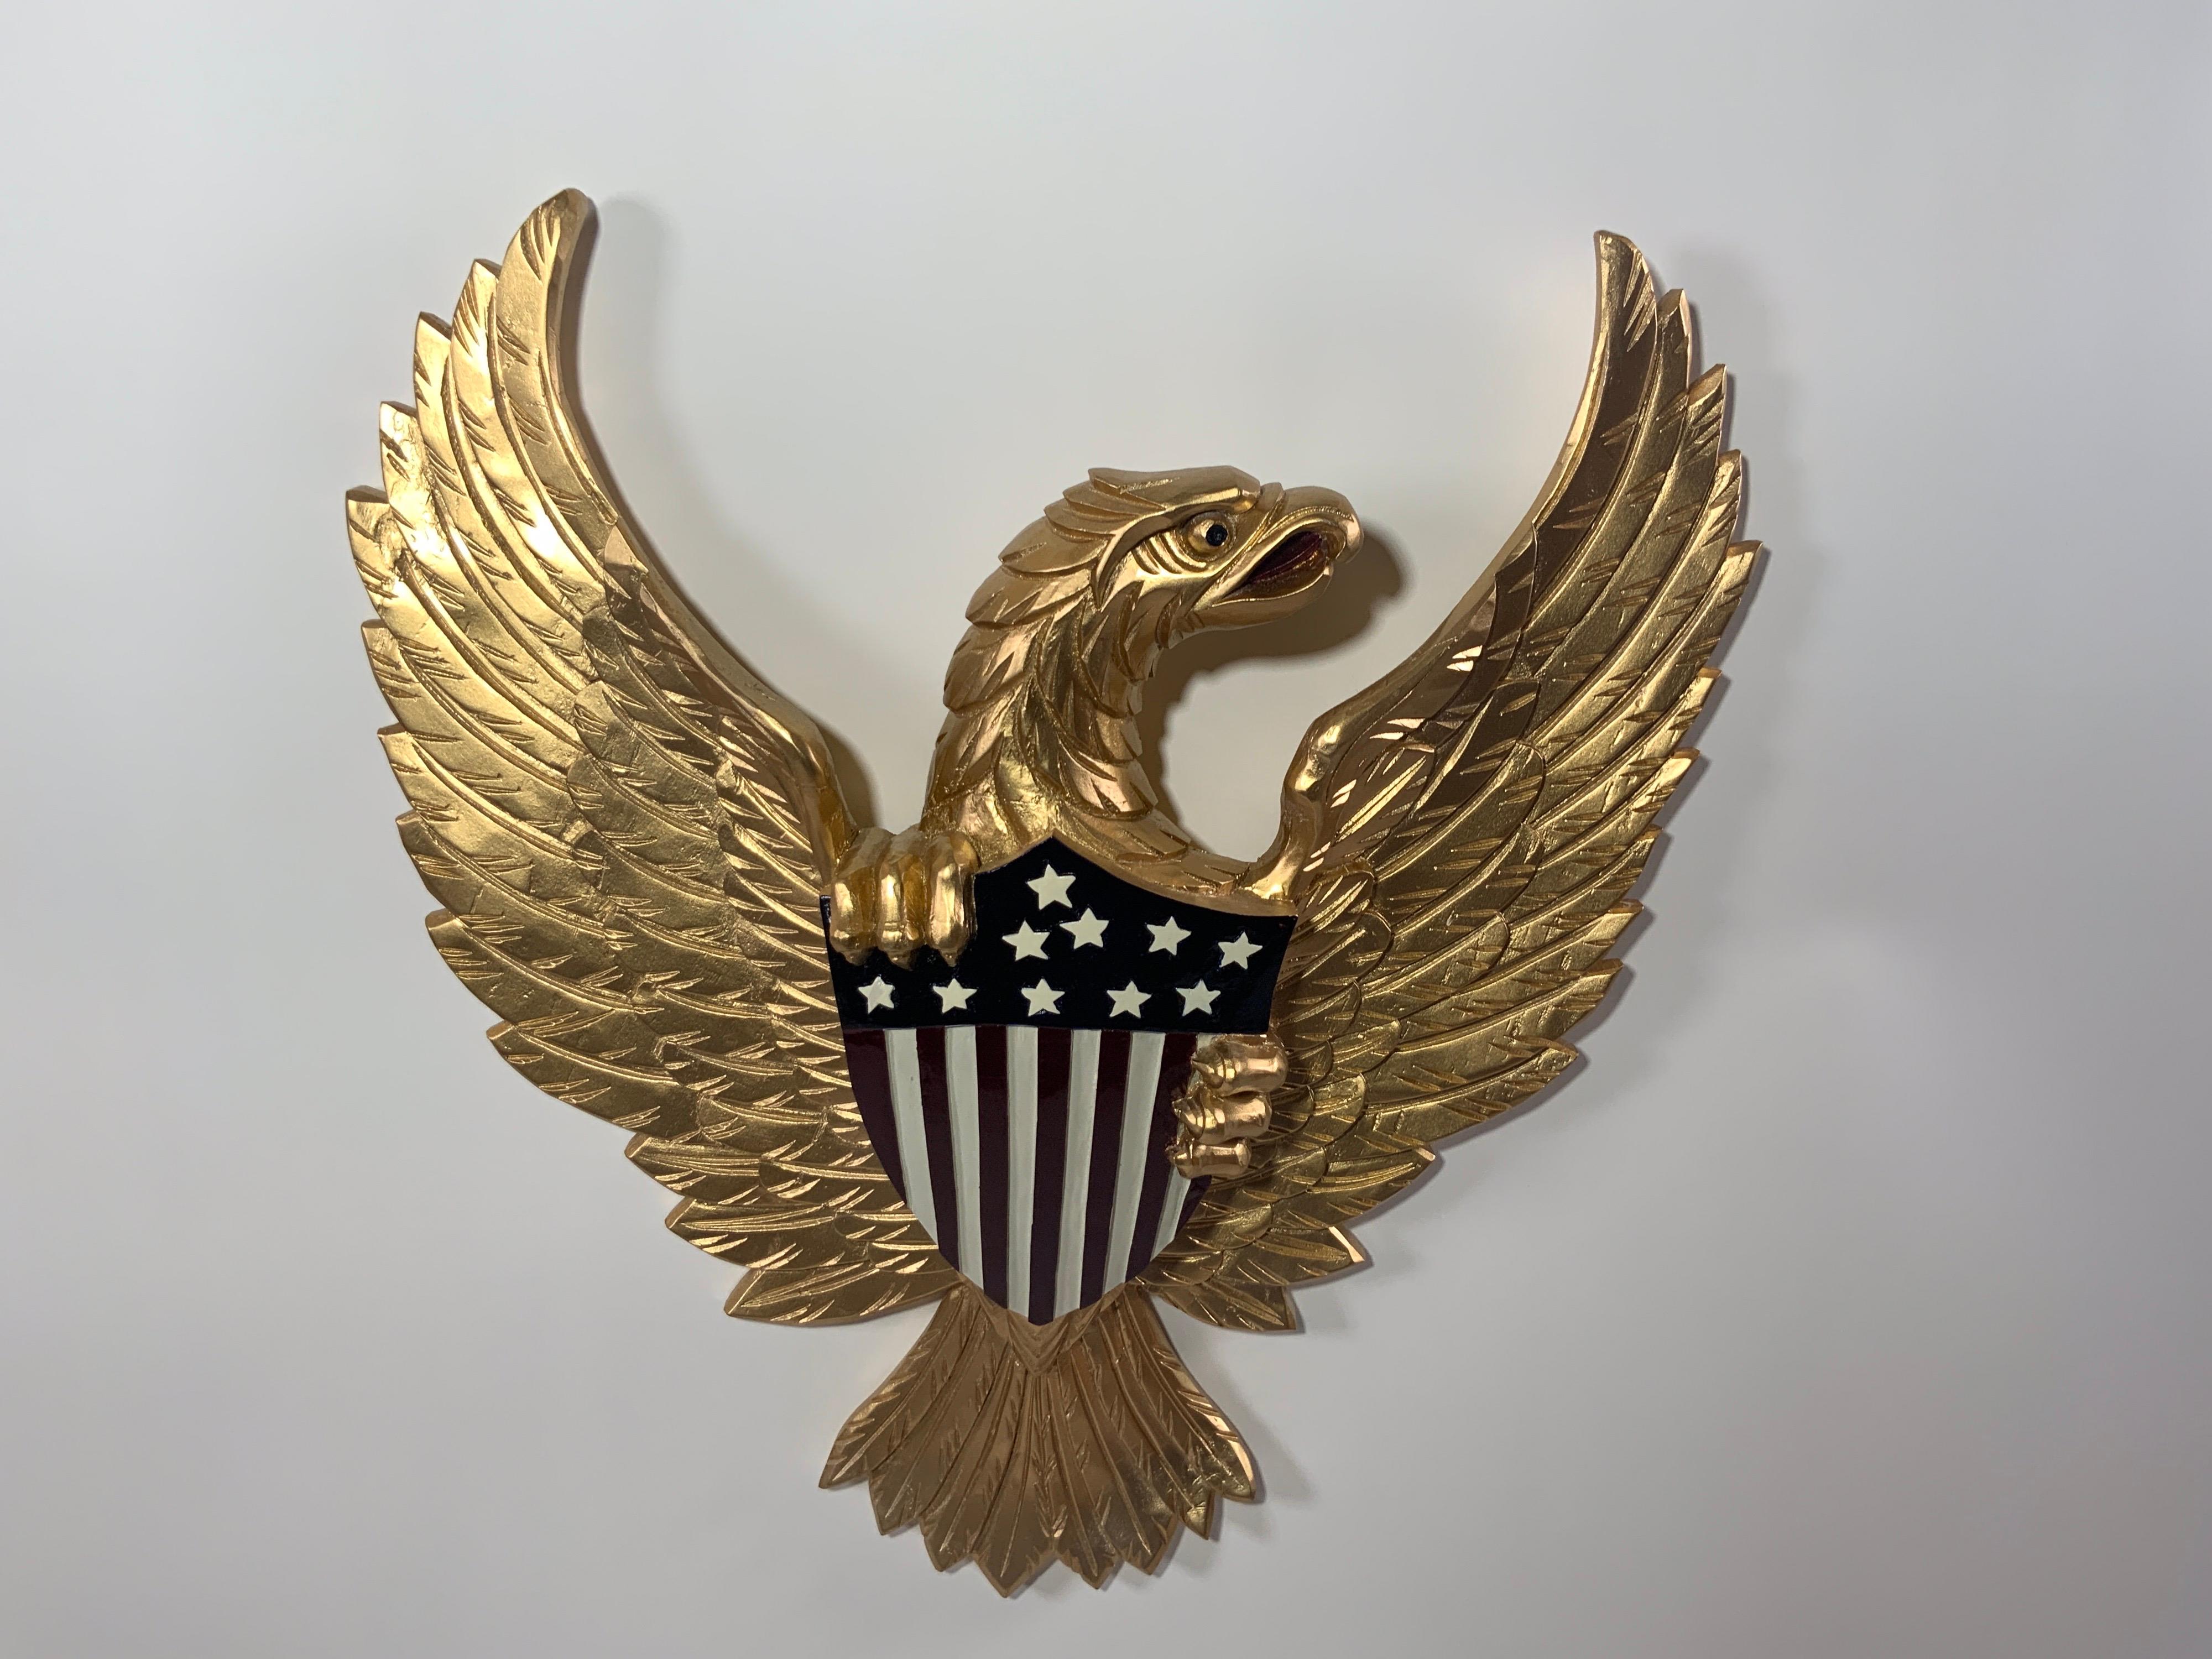 Carved wooden eagle painted in bright gold. Eagle is very detailed and clutching the Great Seal in the likeness of the US Coat of Arms. 

Overall dimensions: 21